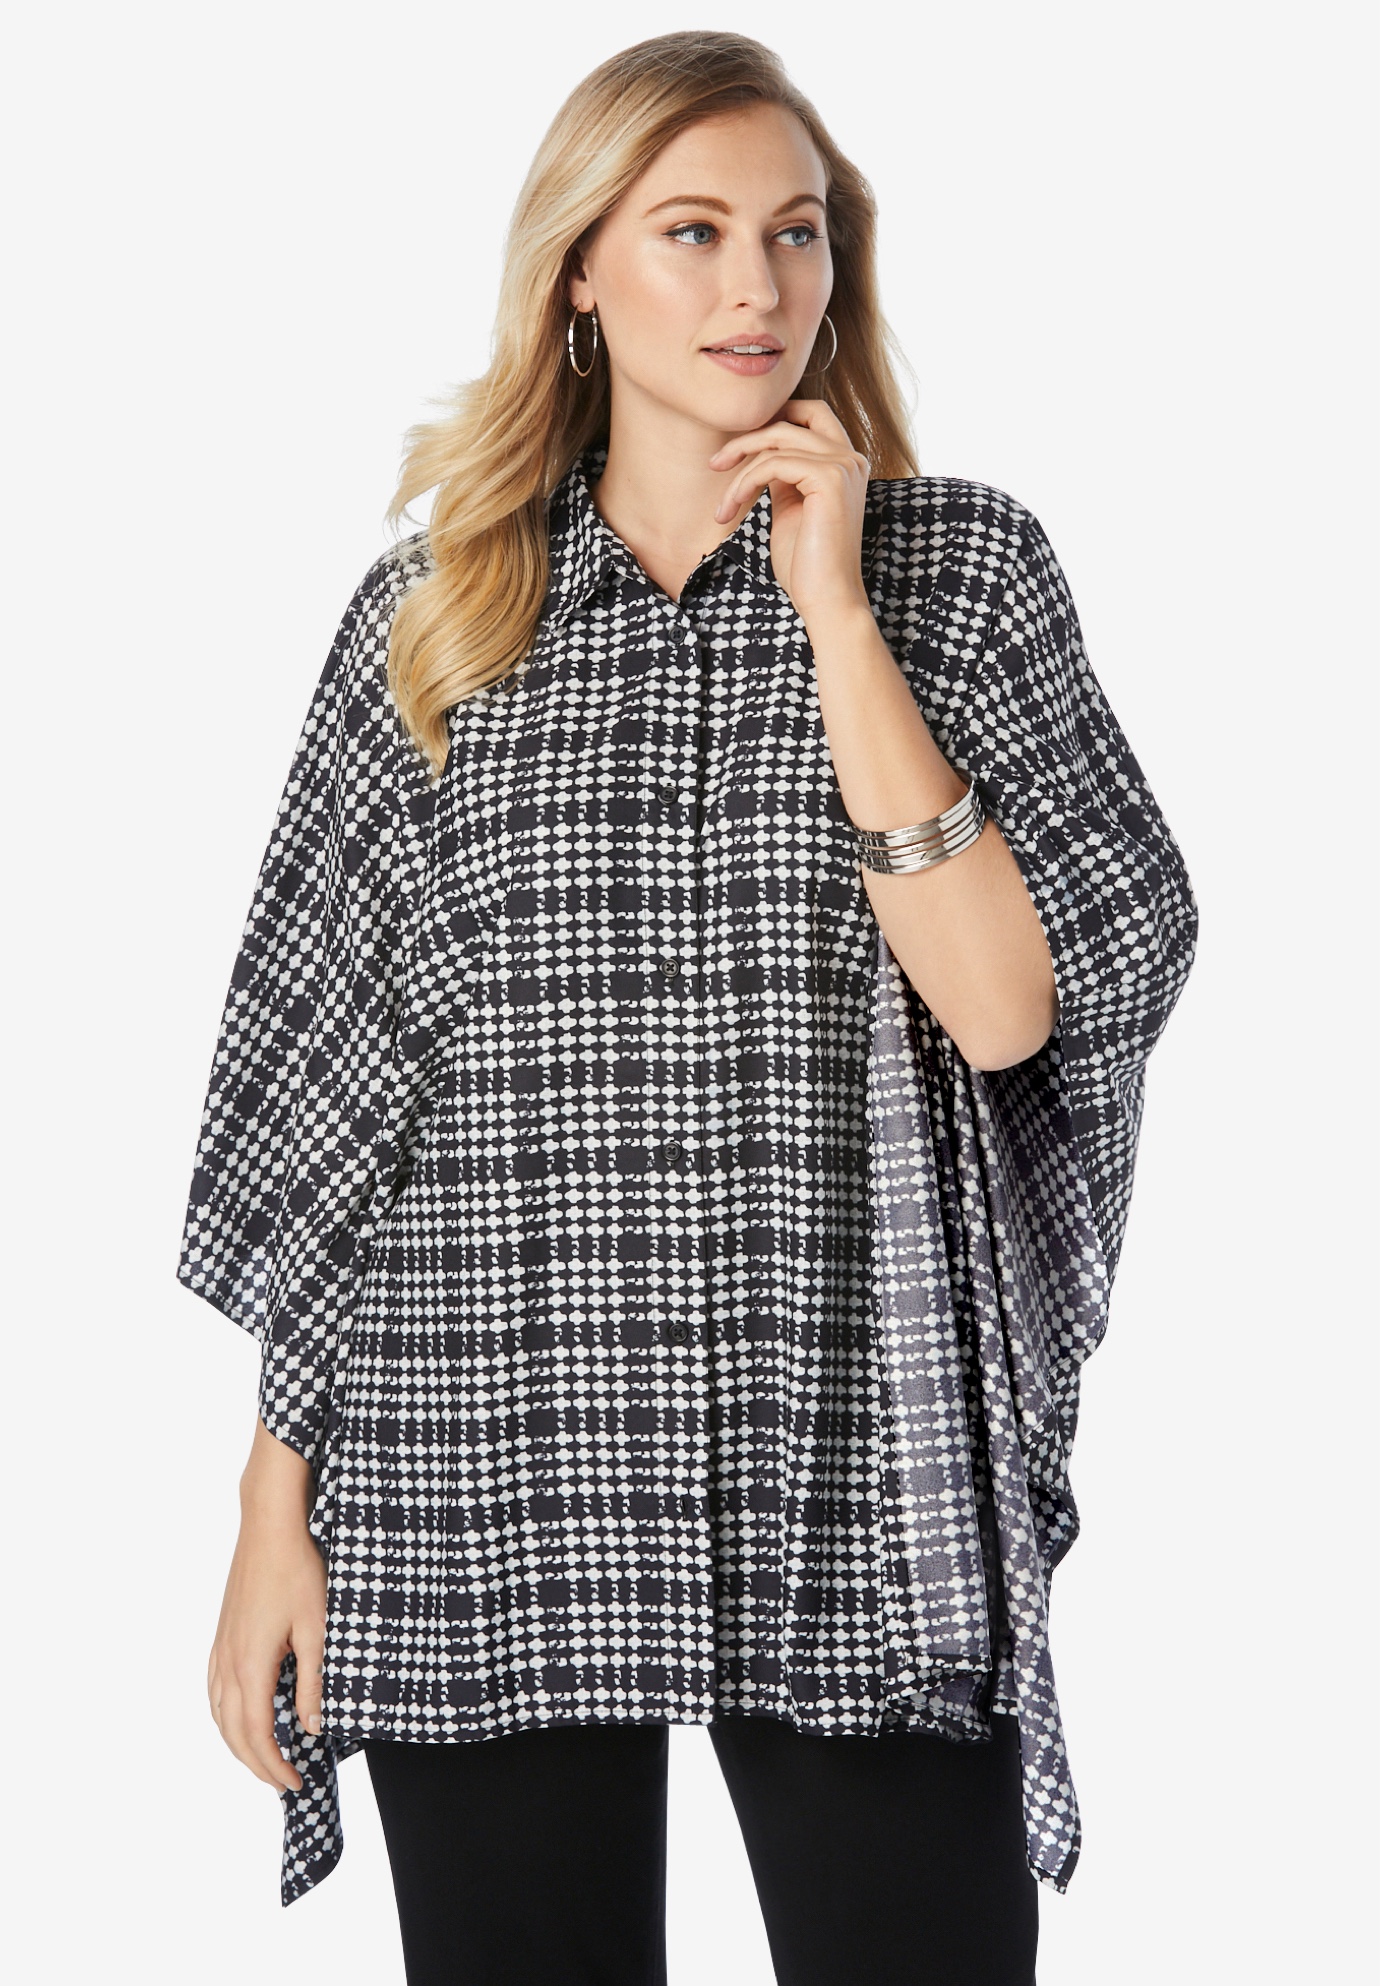 Poncho Shirt | Fullbeauty Outlet